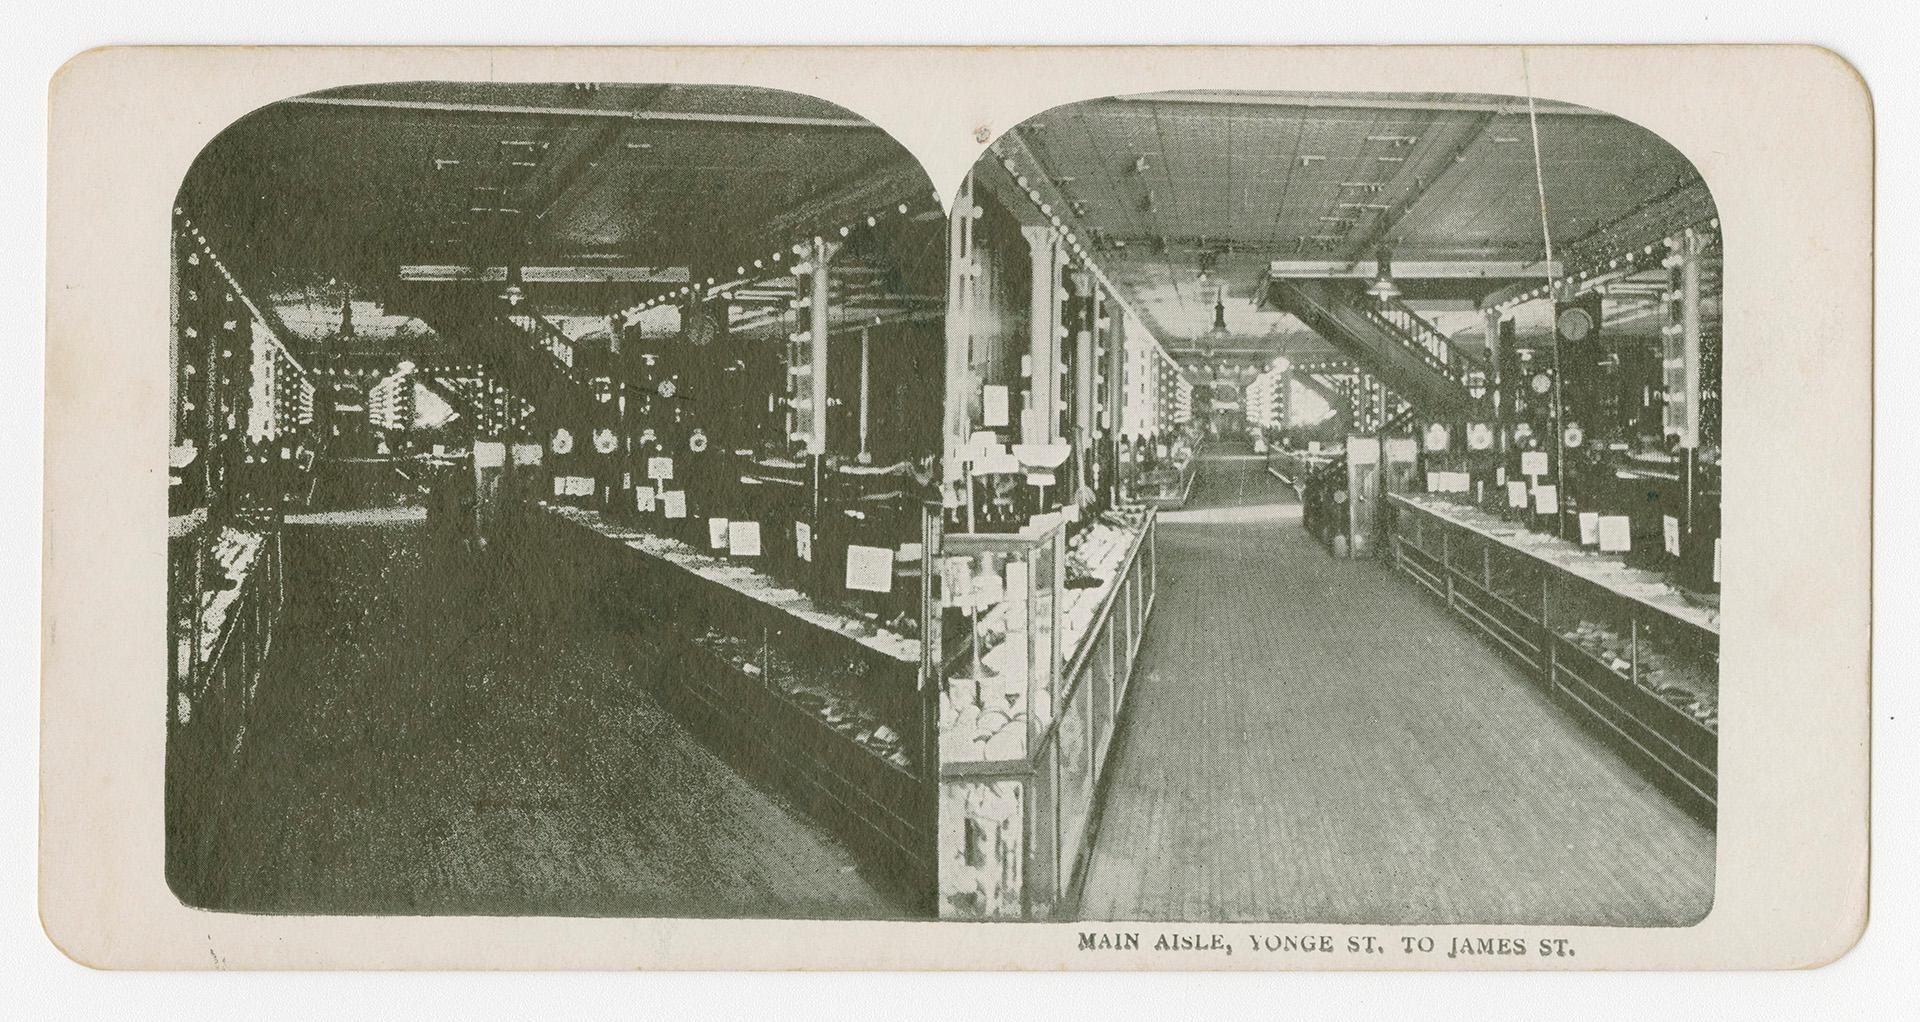 Two photographs of the interior of a retail store, with various items on display on shelves and ...